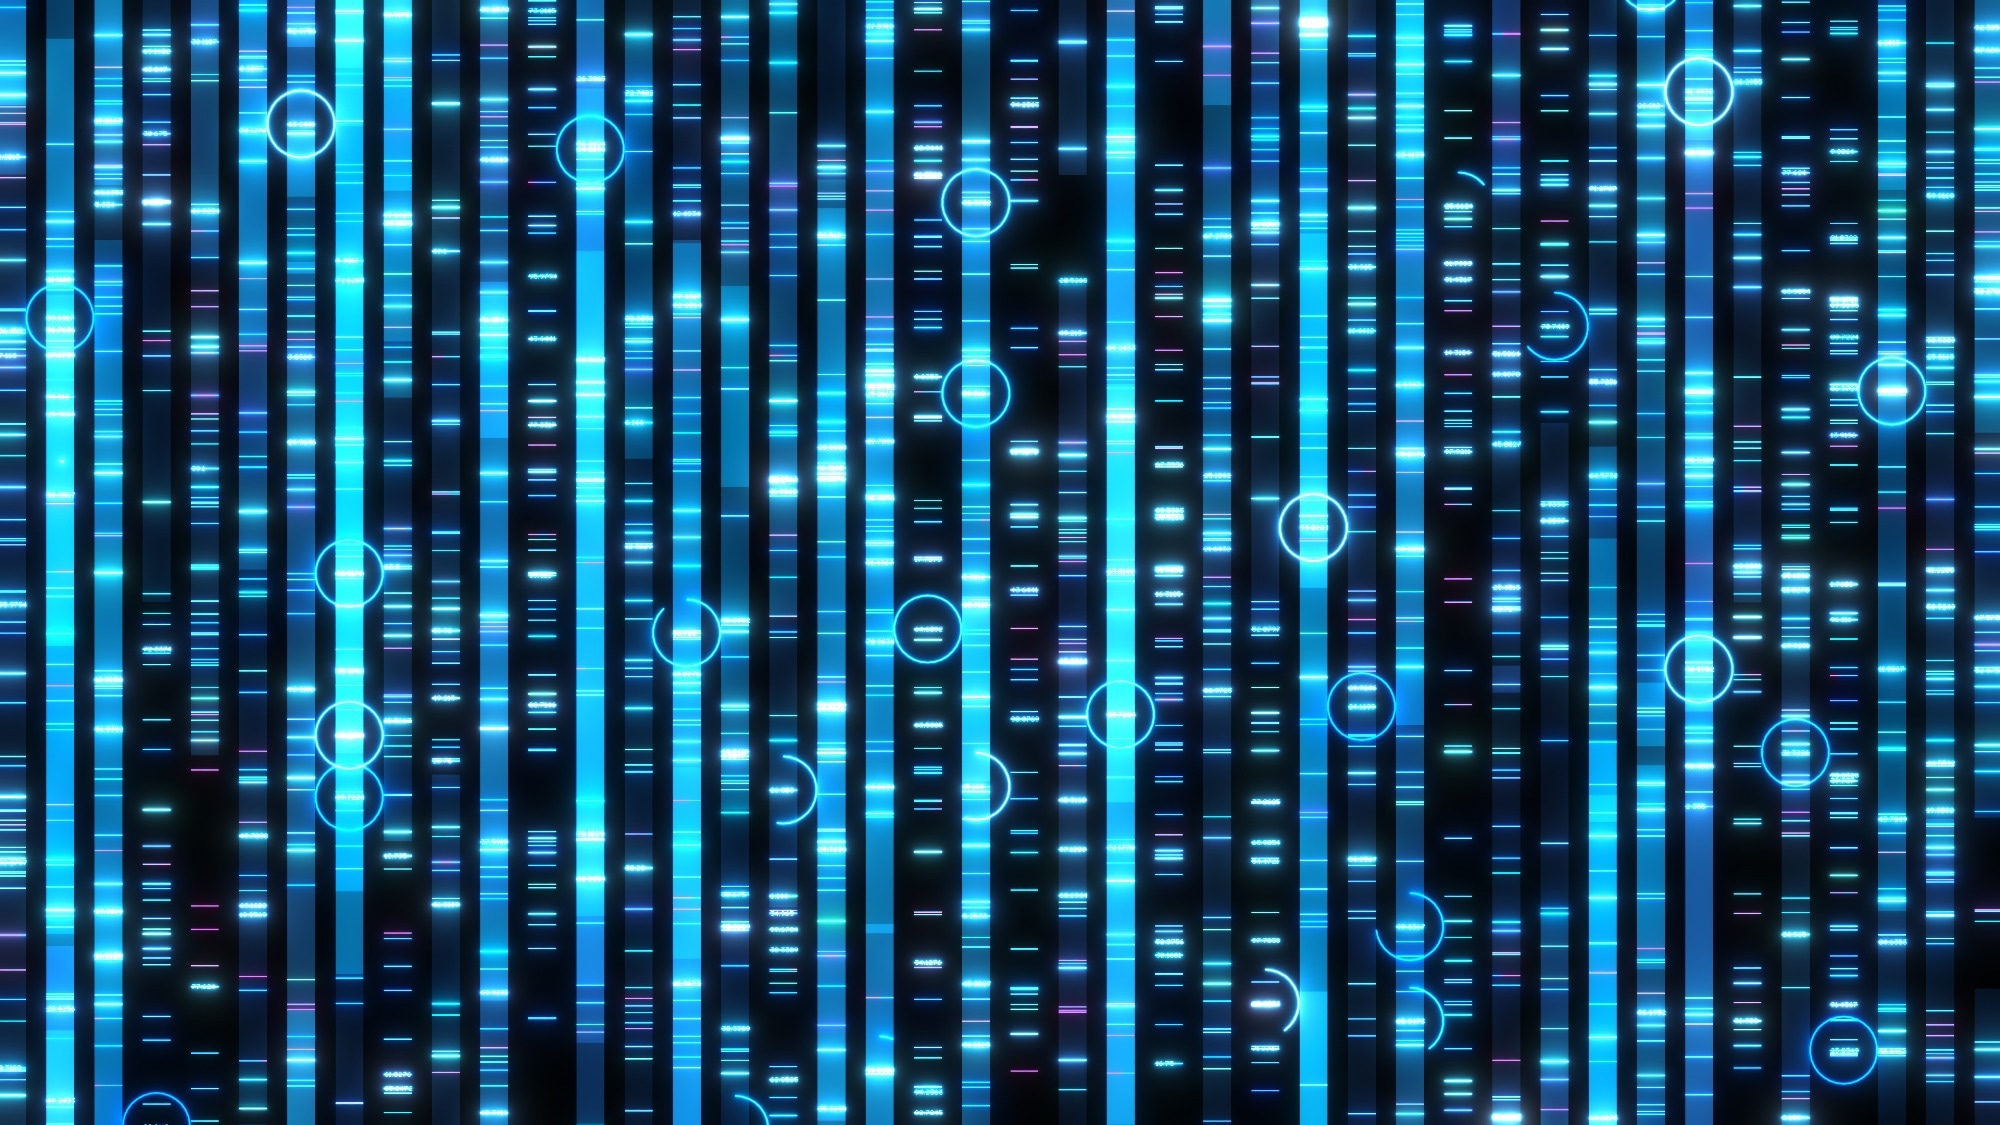 Study: Whole-exome sequencing enables rapid and prenatal diagnosis of inherited skin disorders. Image Credit: Immersion Imagery/Shutterstock.com